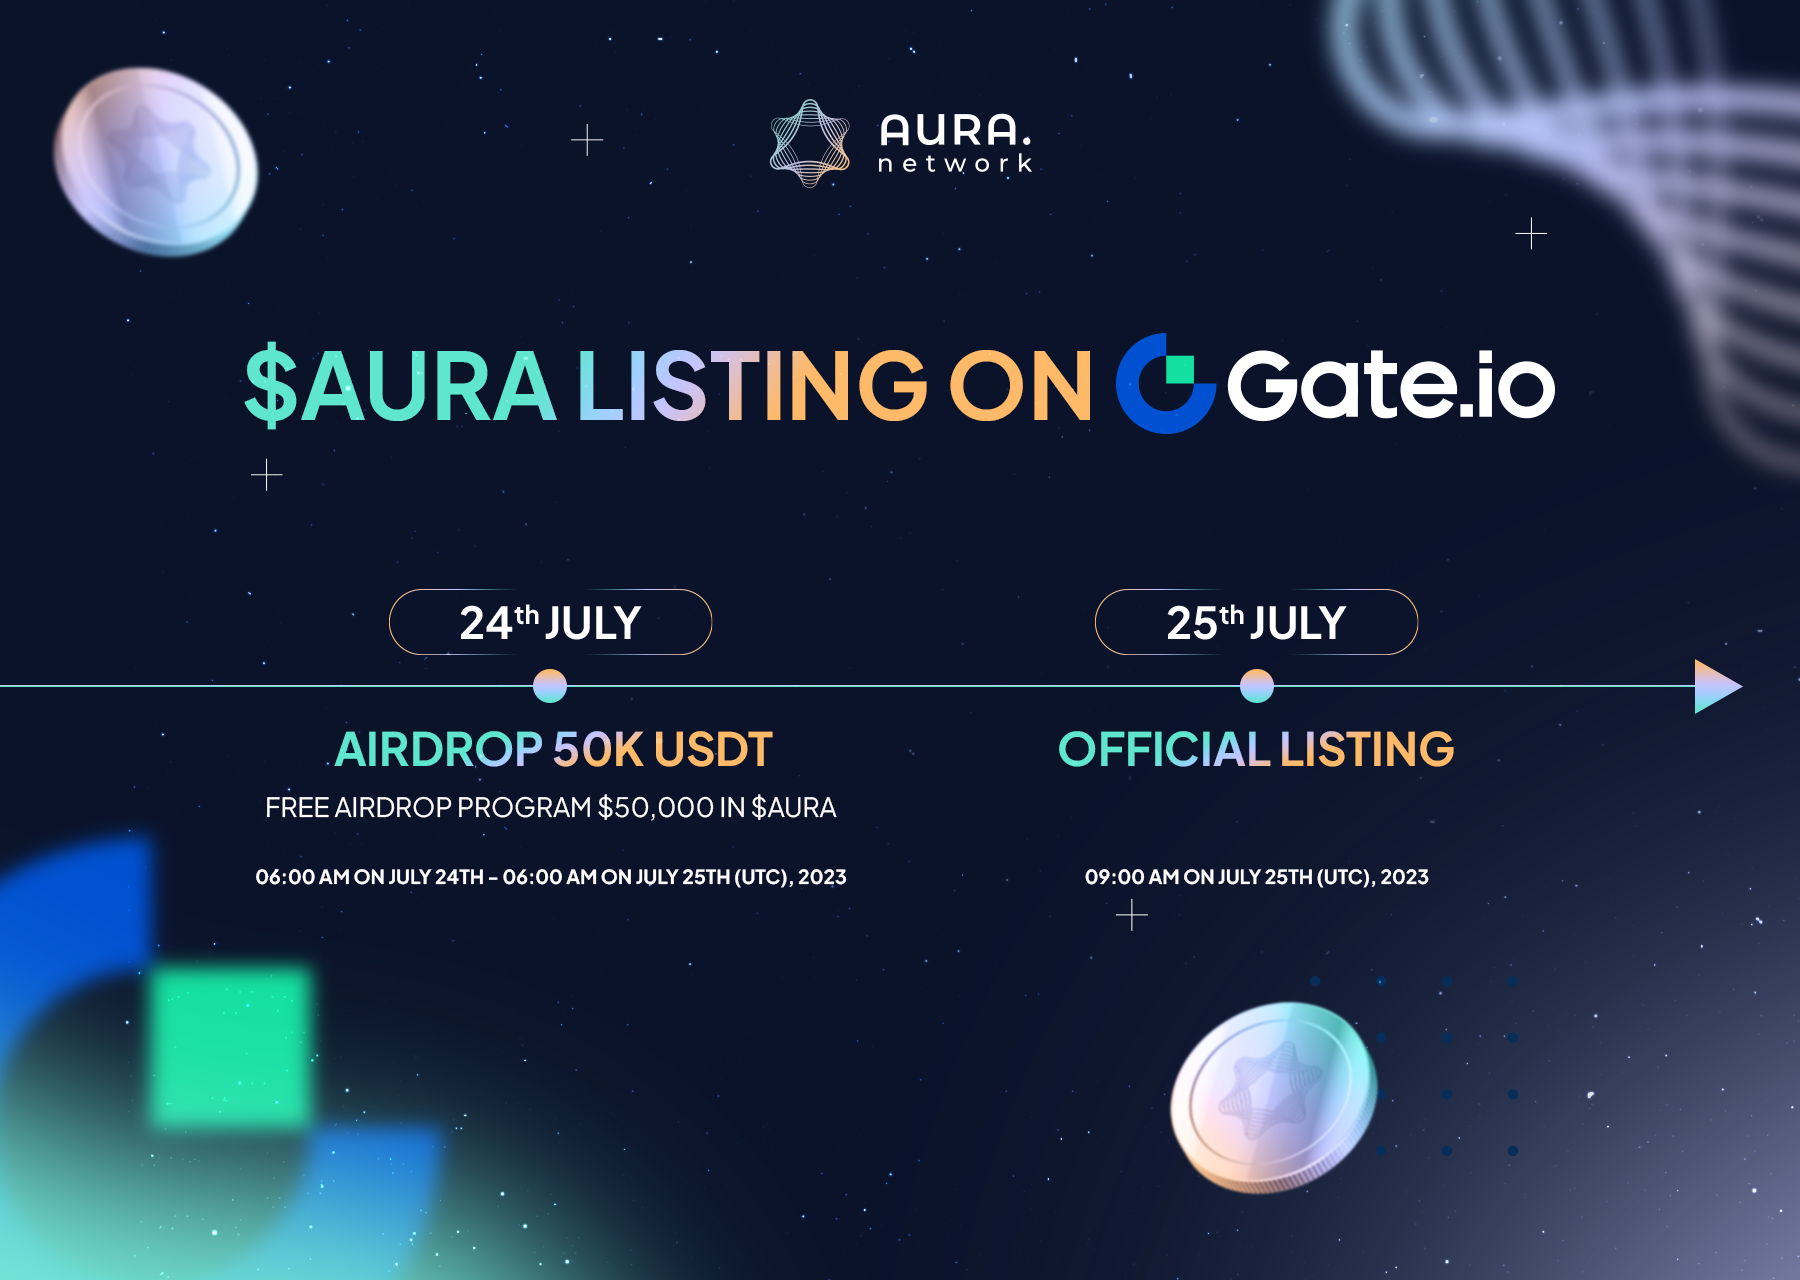 Aura Network (AURA) will be listed on Gate.io on July 25th